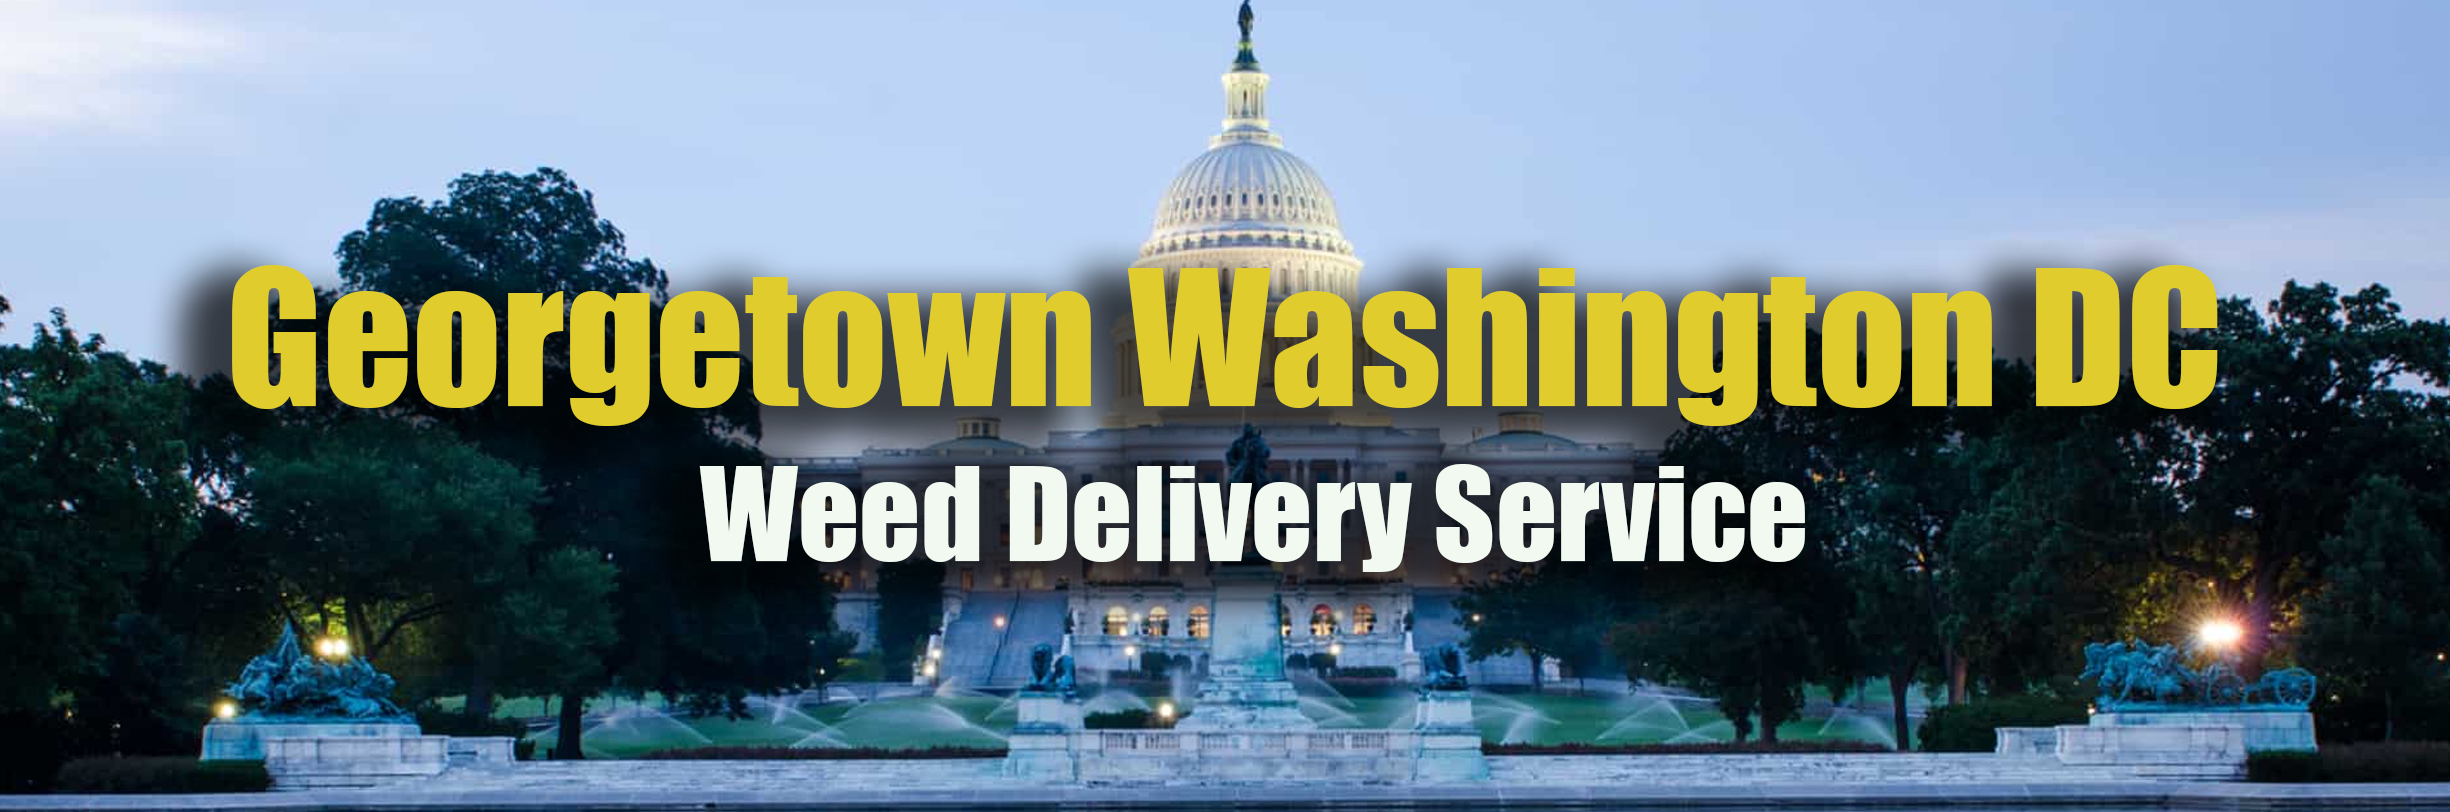 weed delivery in georgetown